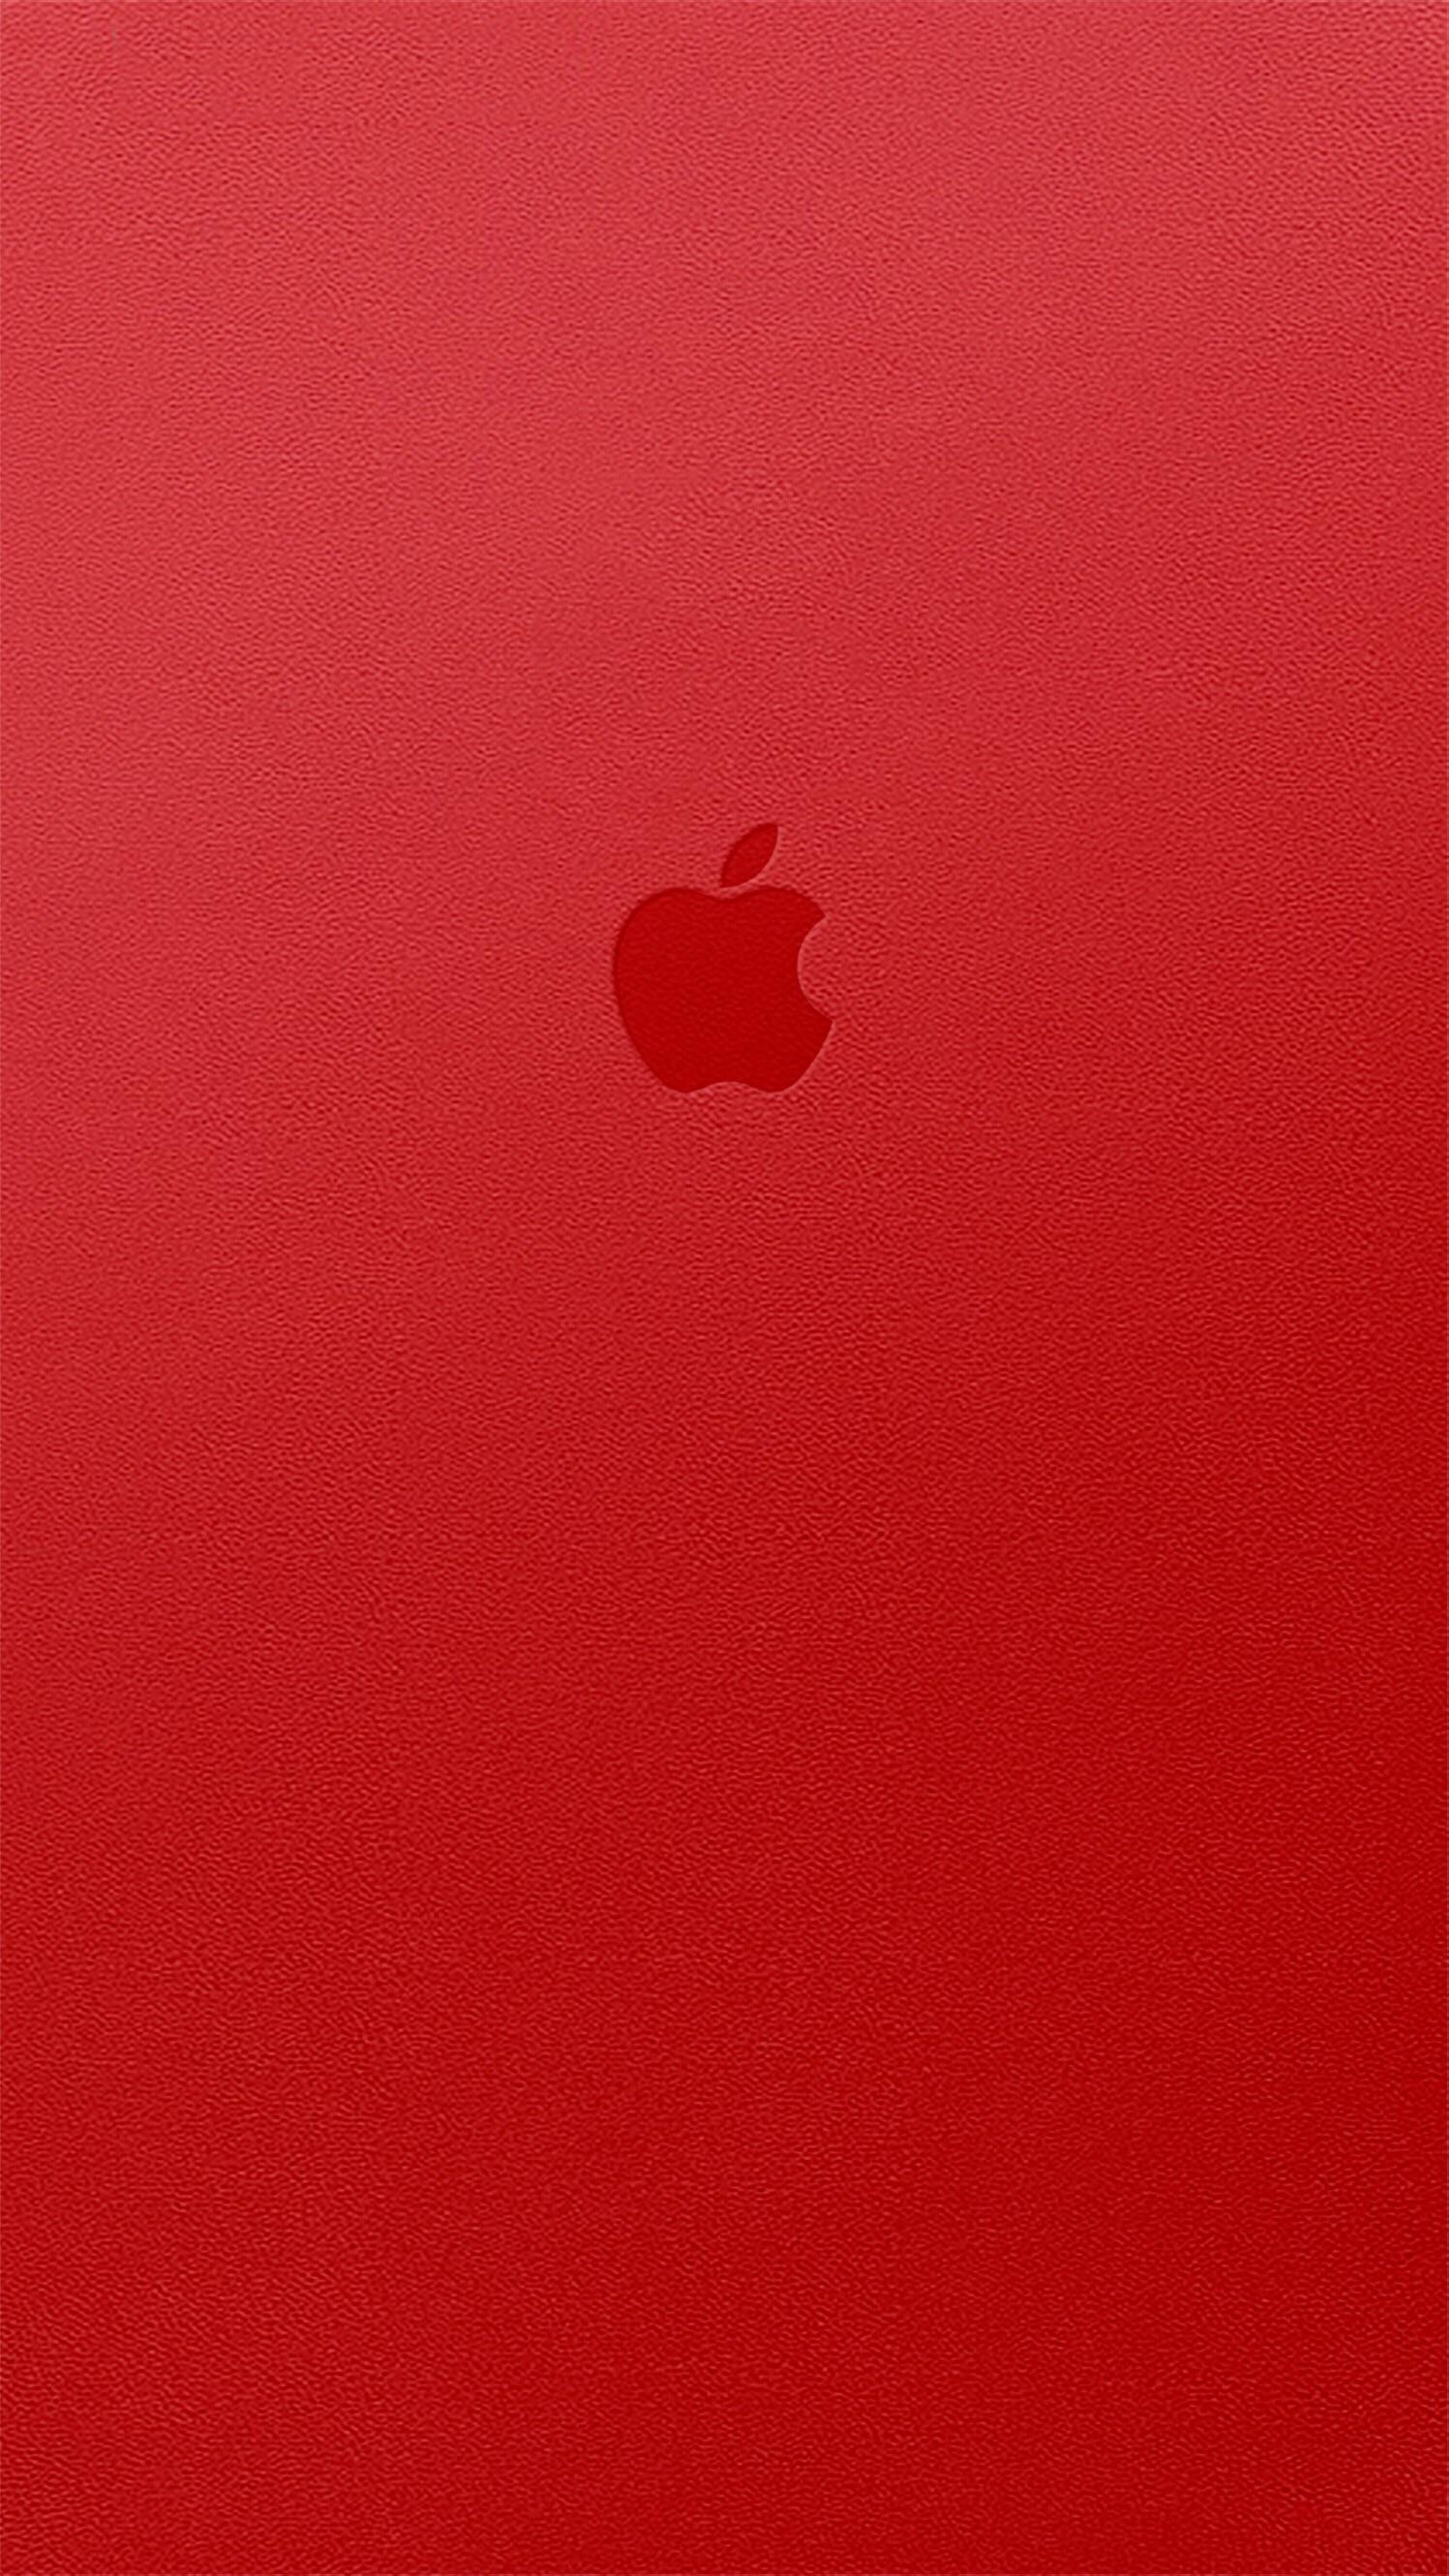 Red Iphone Wallpaper - Product Red Iphone 7 - HD Wallpaper 